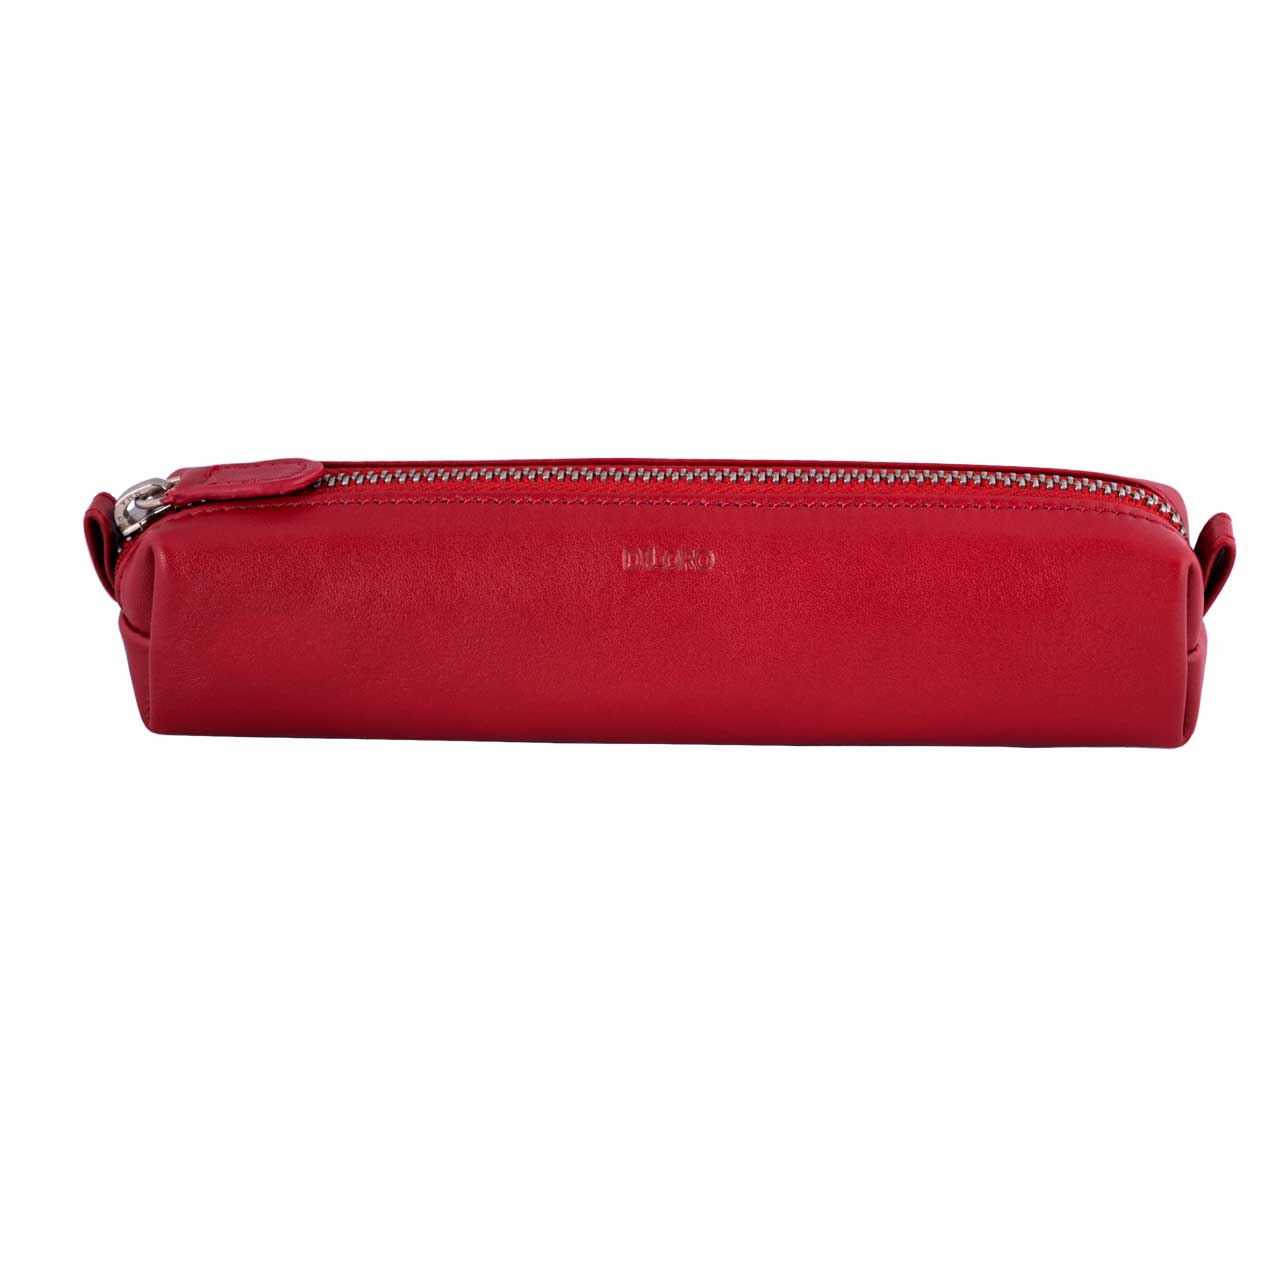 Multi-Purpose Zippered Leather Pen Pencil Case in Various Colors - Red